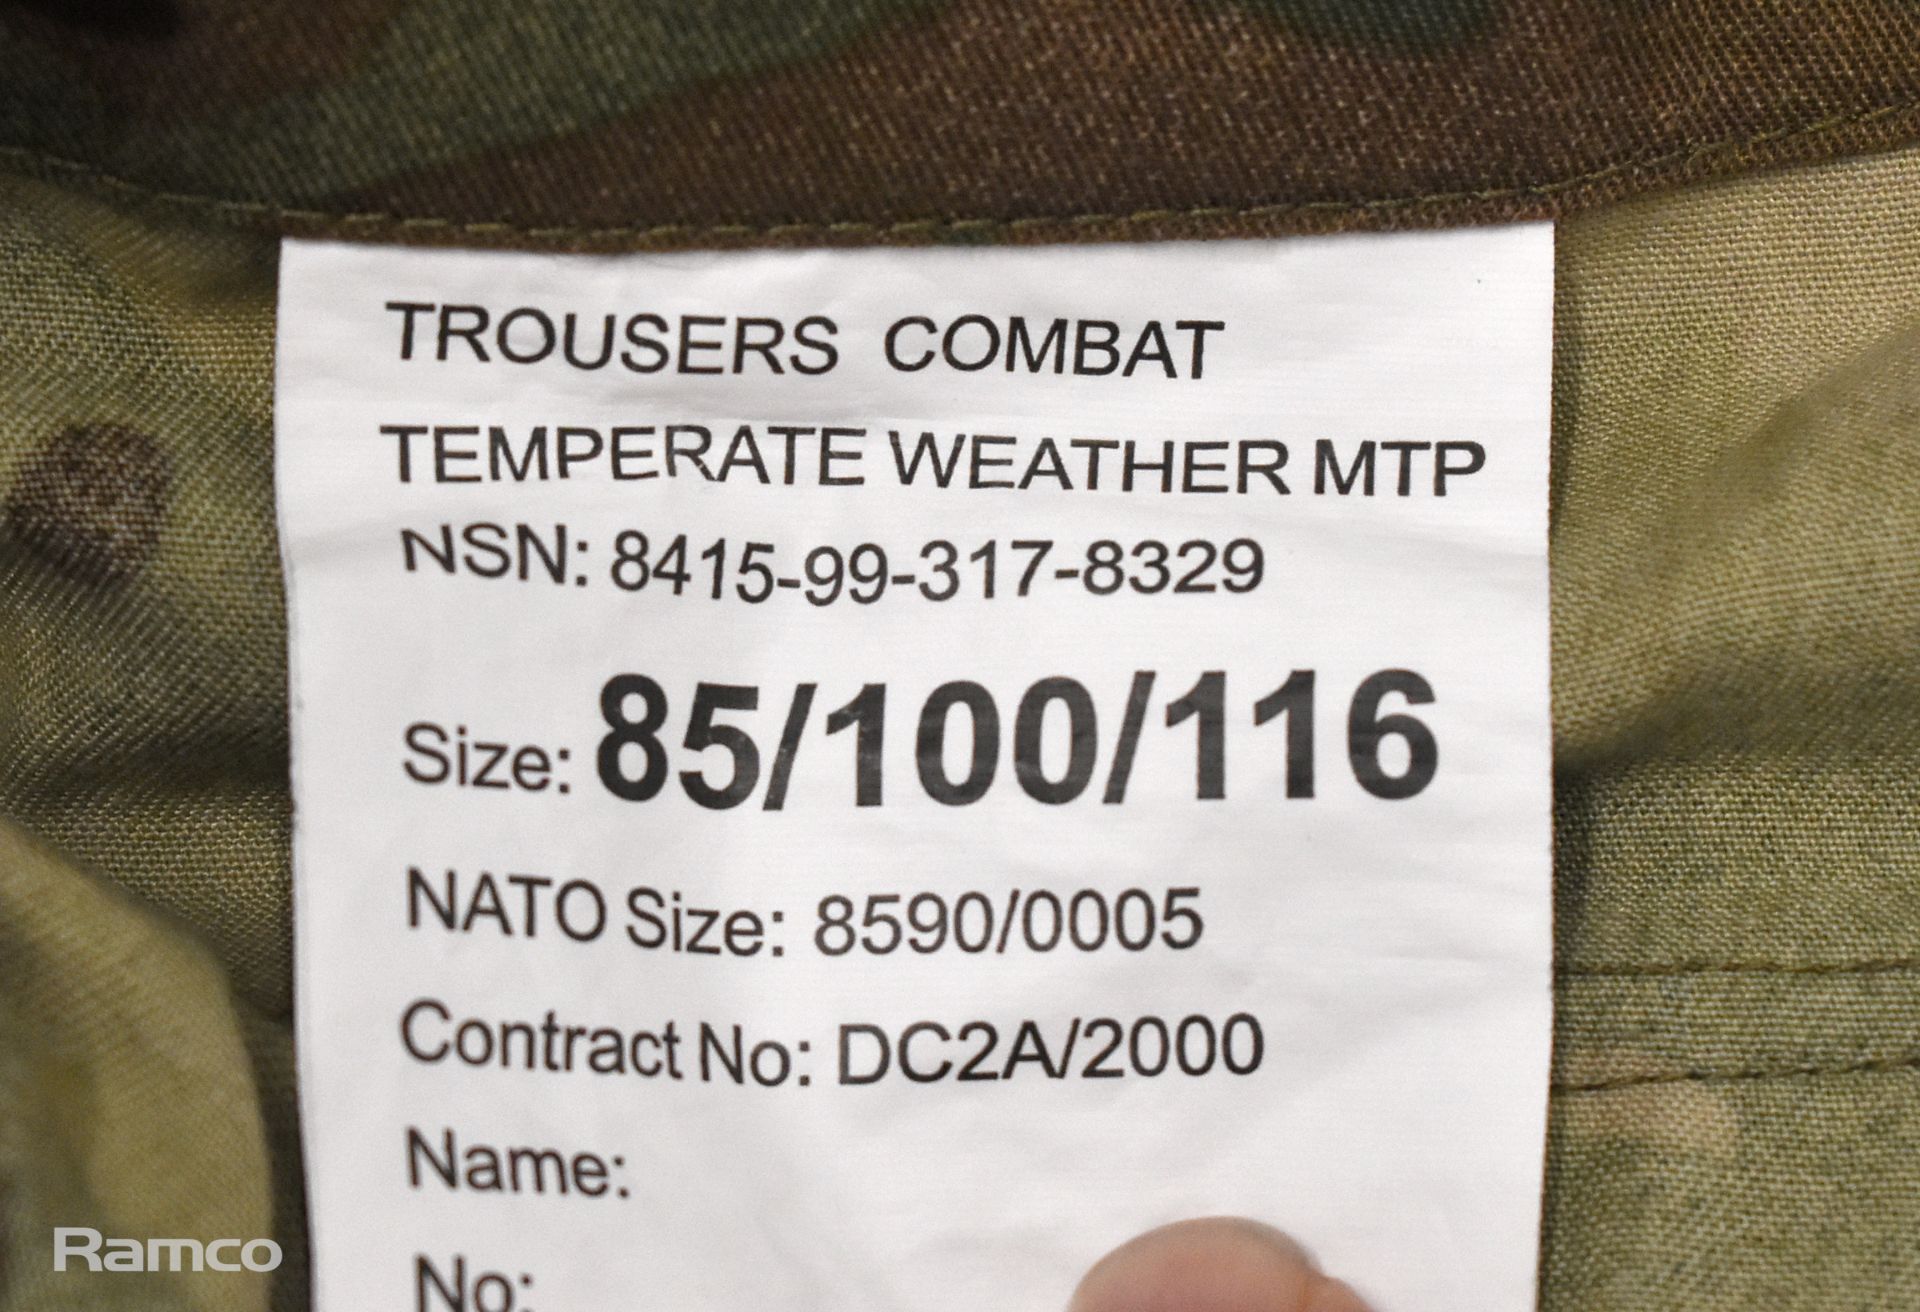 80x British Army combat trousers temperate weather - mixed grades and sizes - Image 6 of 8